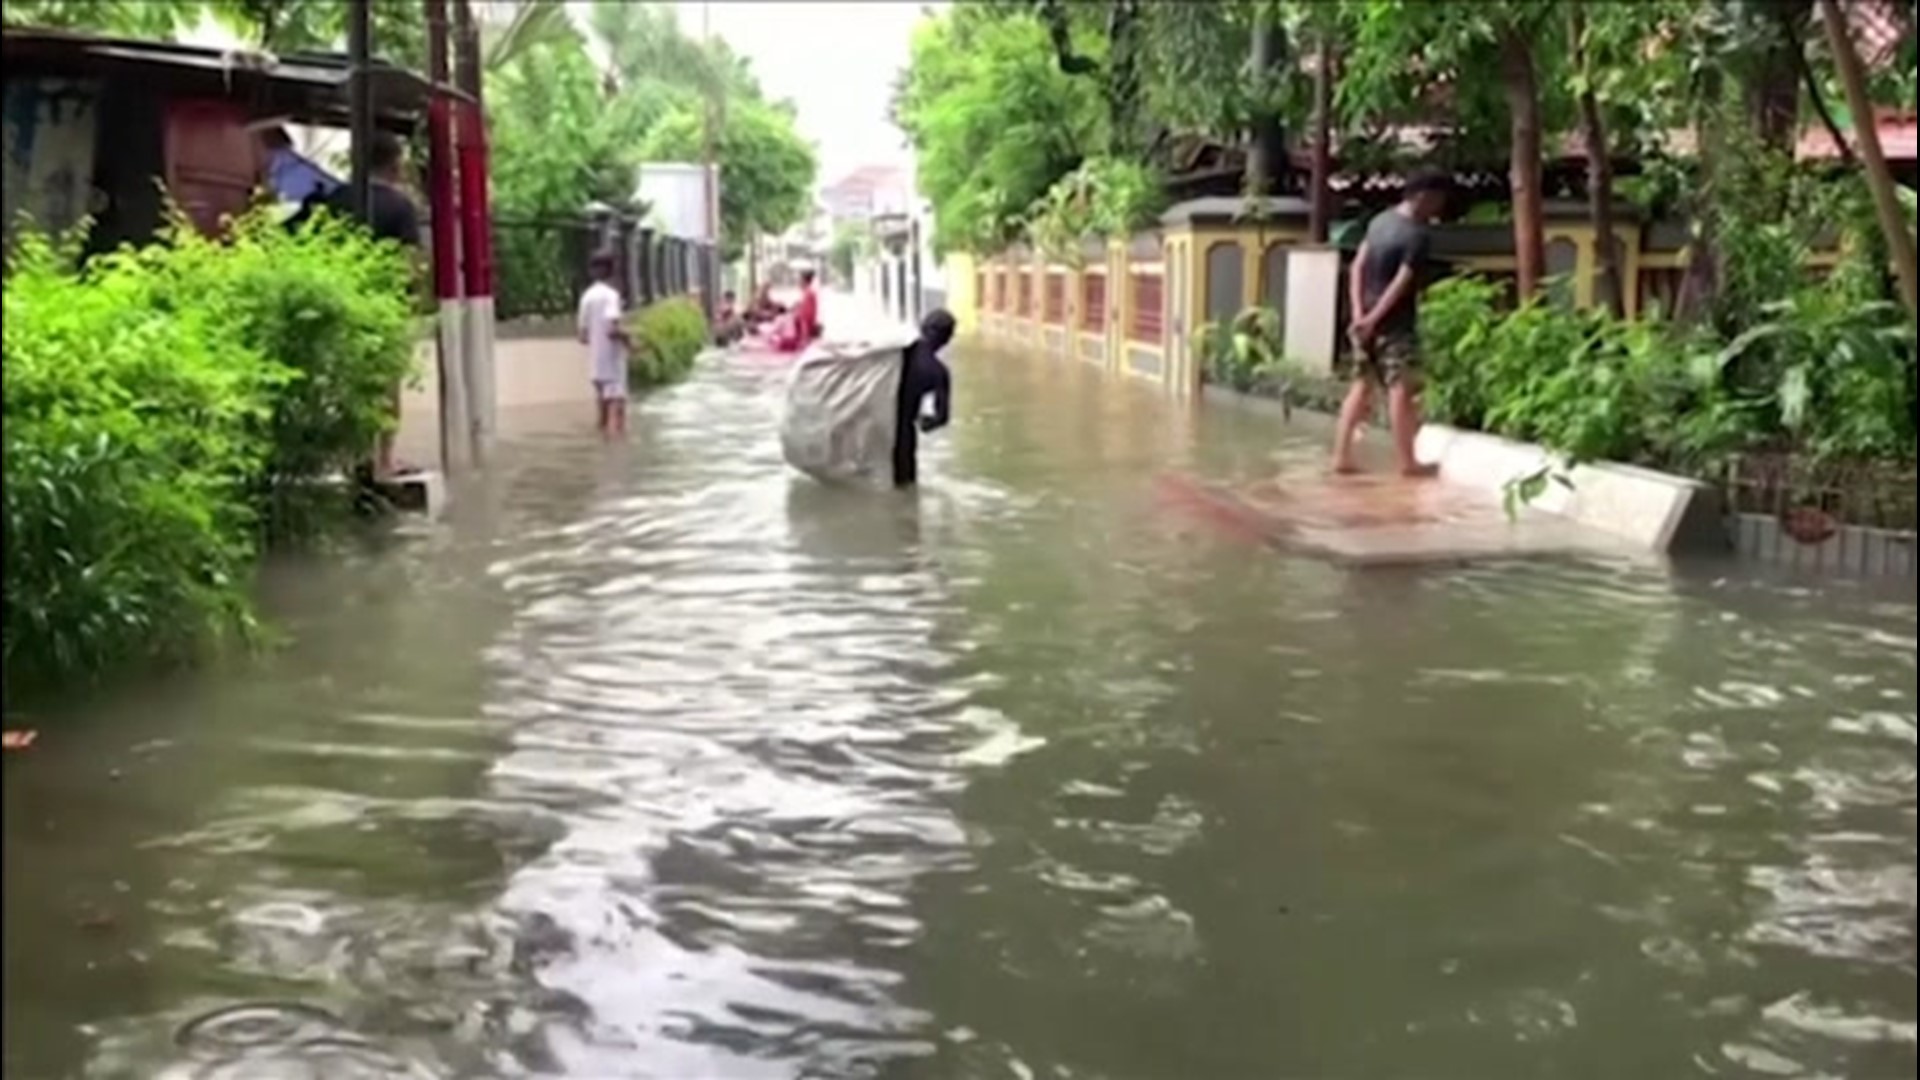 Residents of Jakarta, Indonesia, waded through flooded streets after heavy rain soaked the city on Feb. 25.